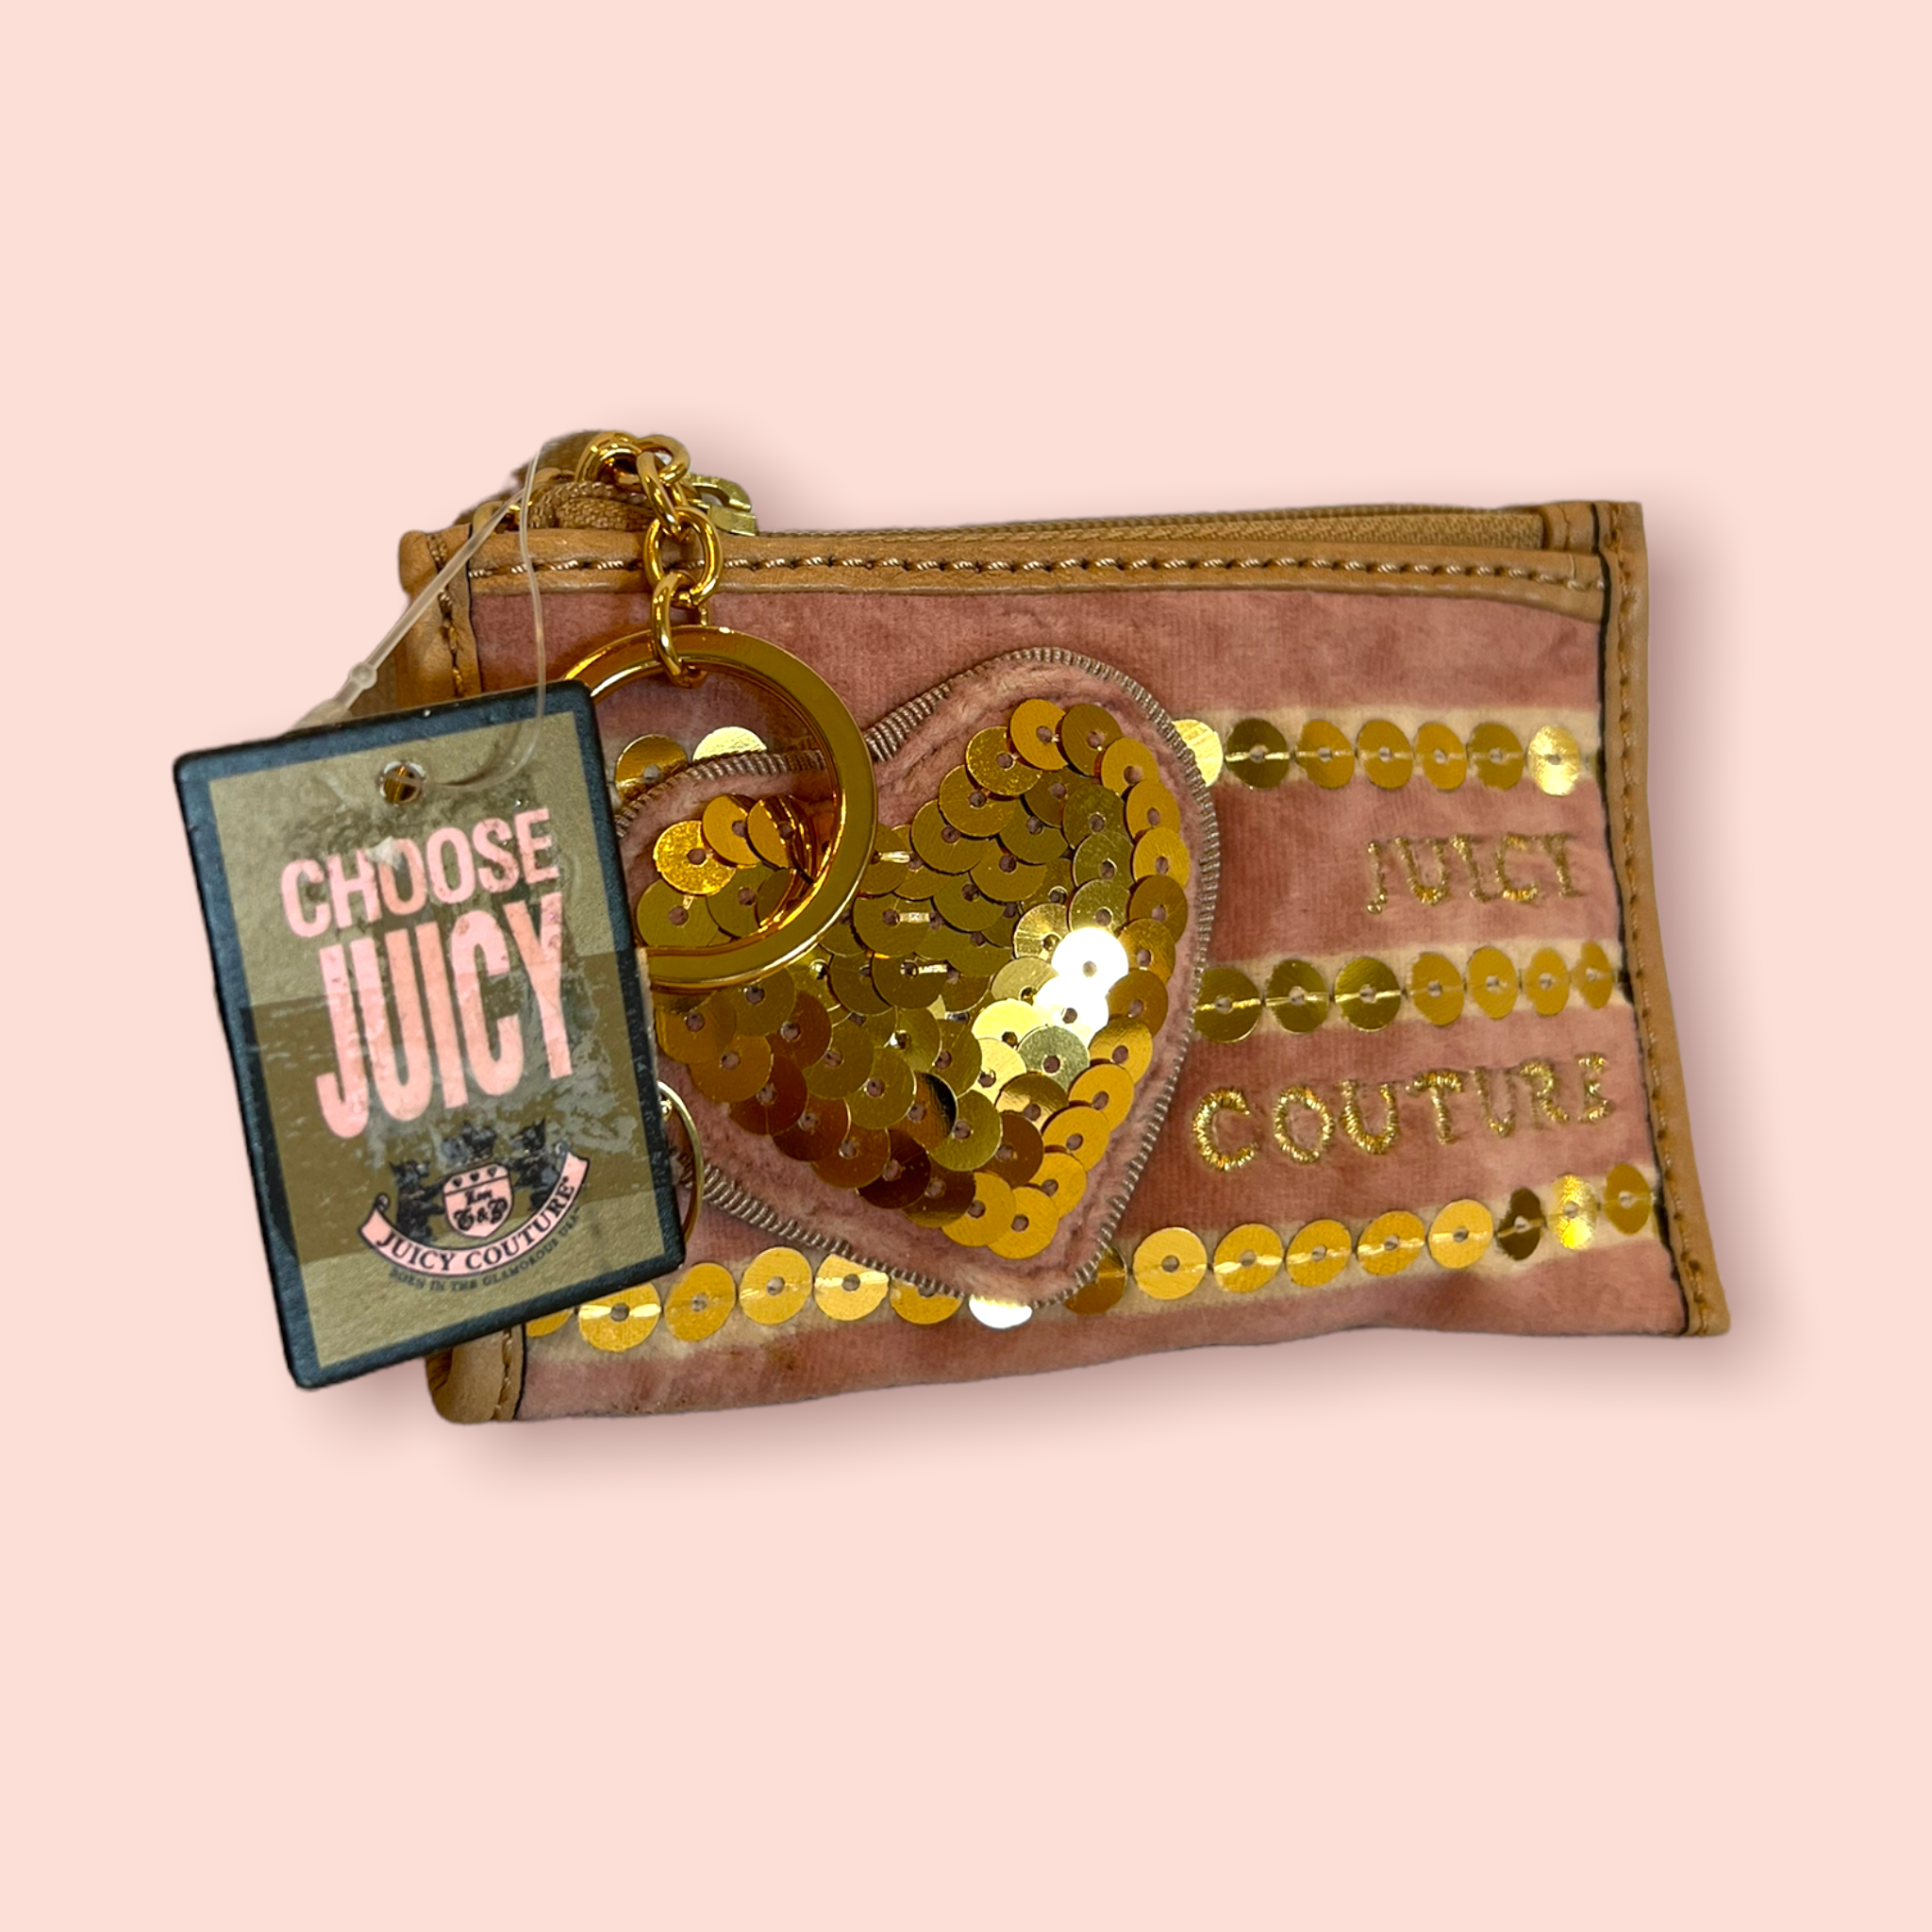 Juicy couture off the chain heart coin case | JayluchsShops